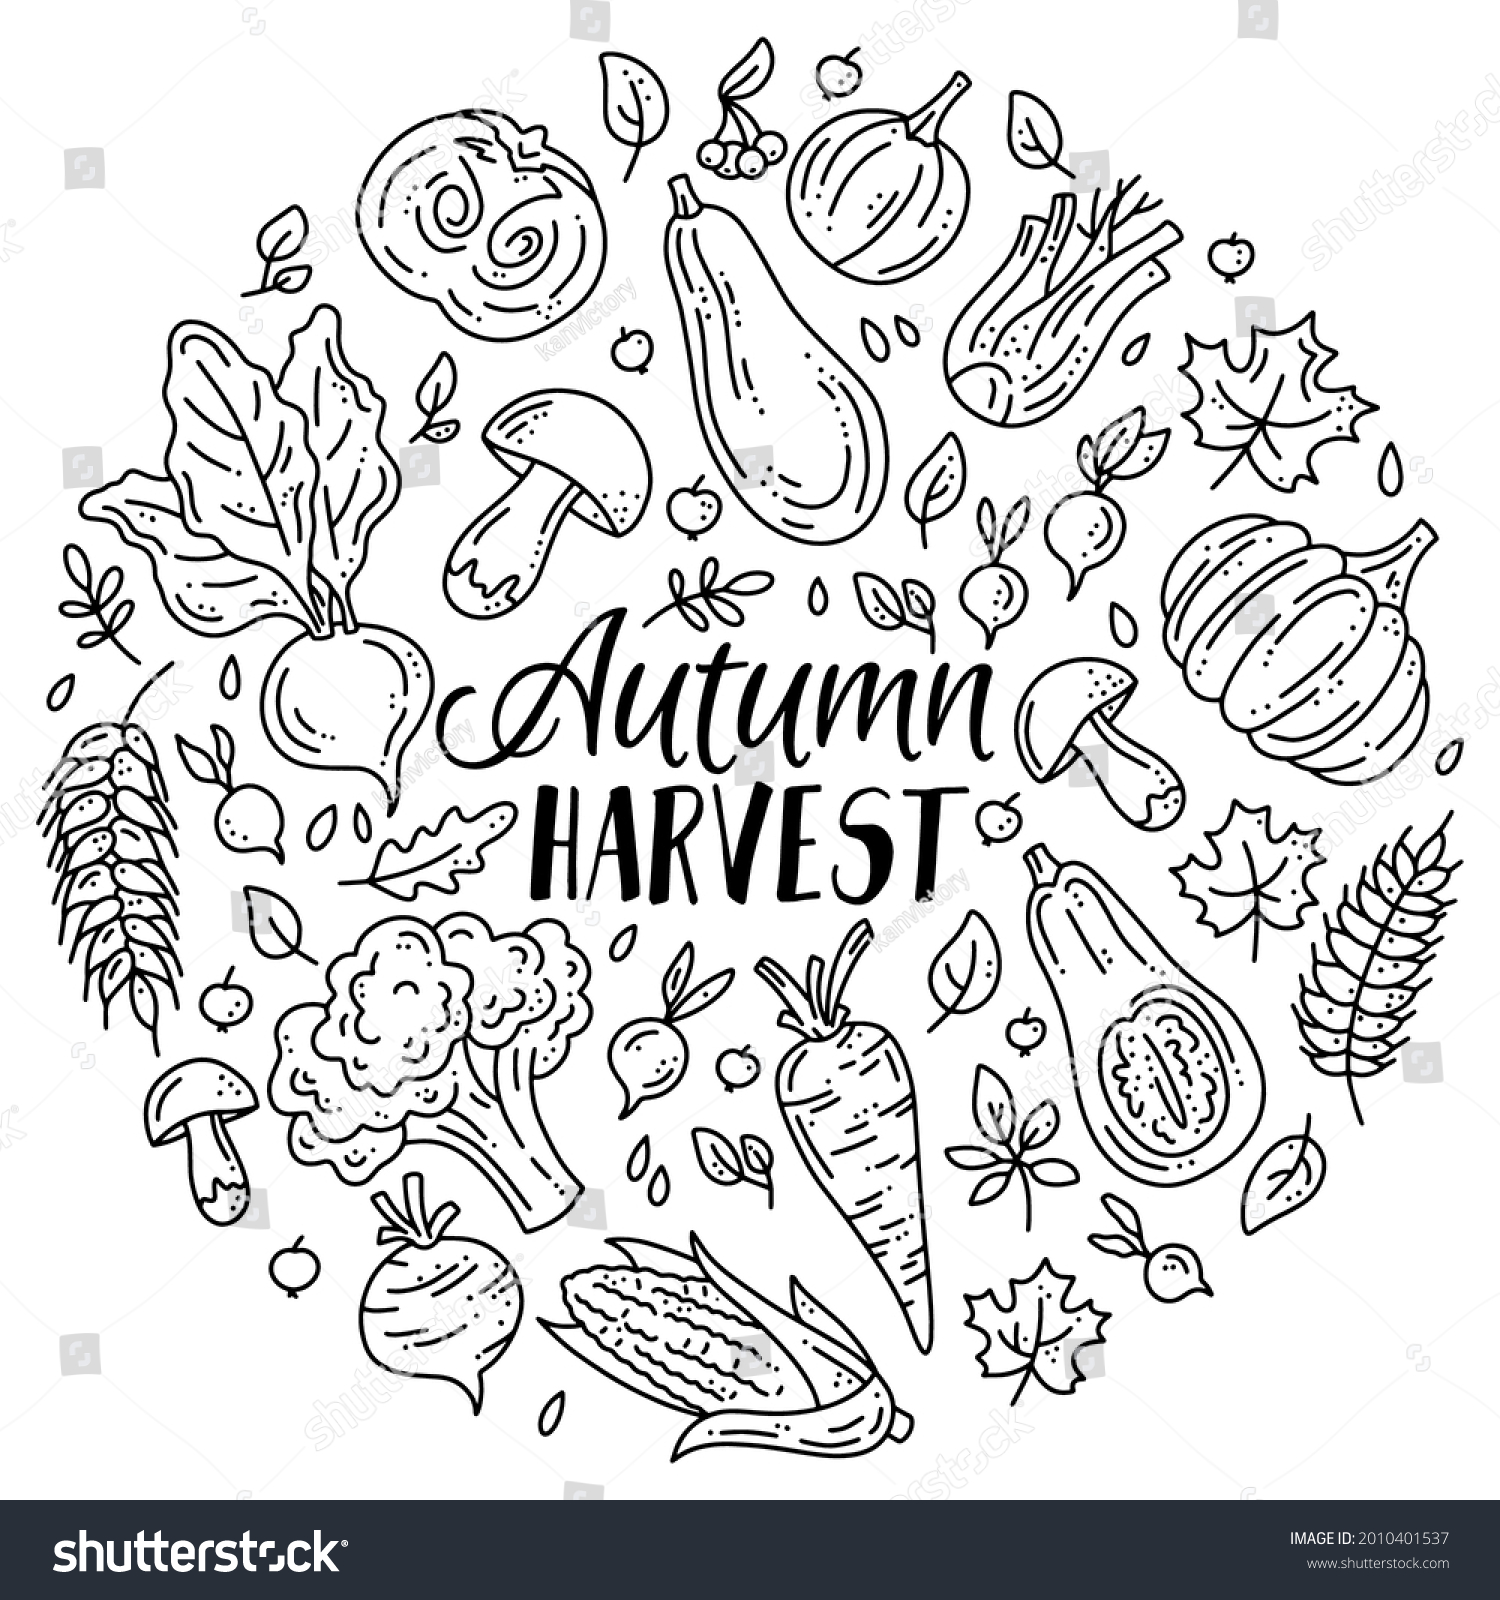 SVG of Circular vector set of vegetables and mushrooms for the autumn harvest. Linear plants in doodle sketch style. Pumpkins, mushrooms and broccoli. svg